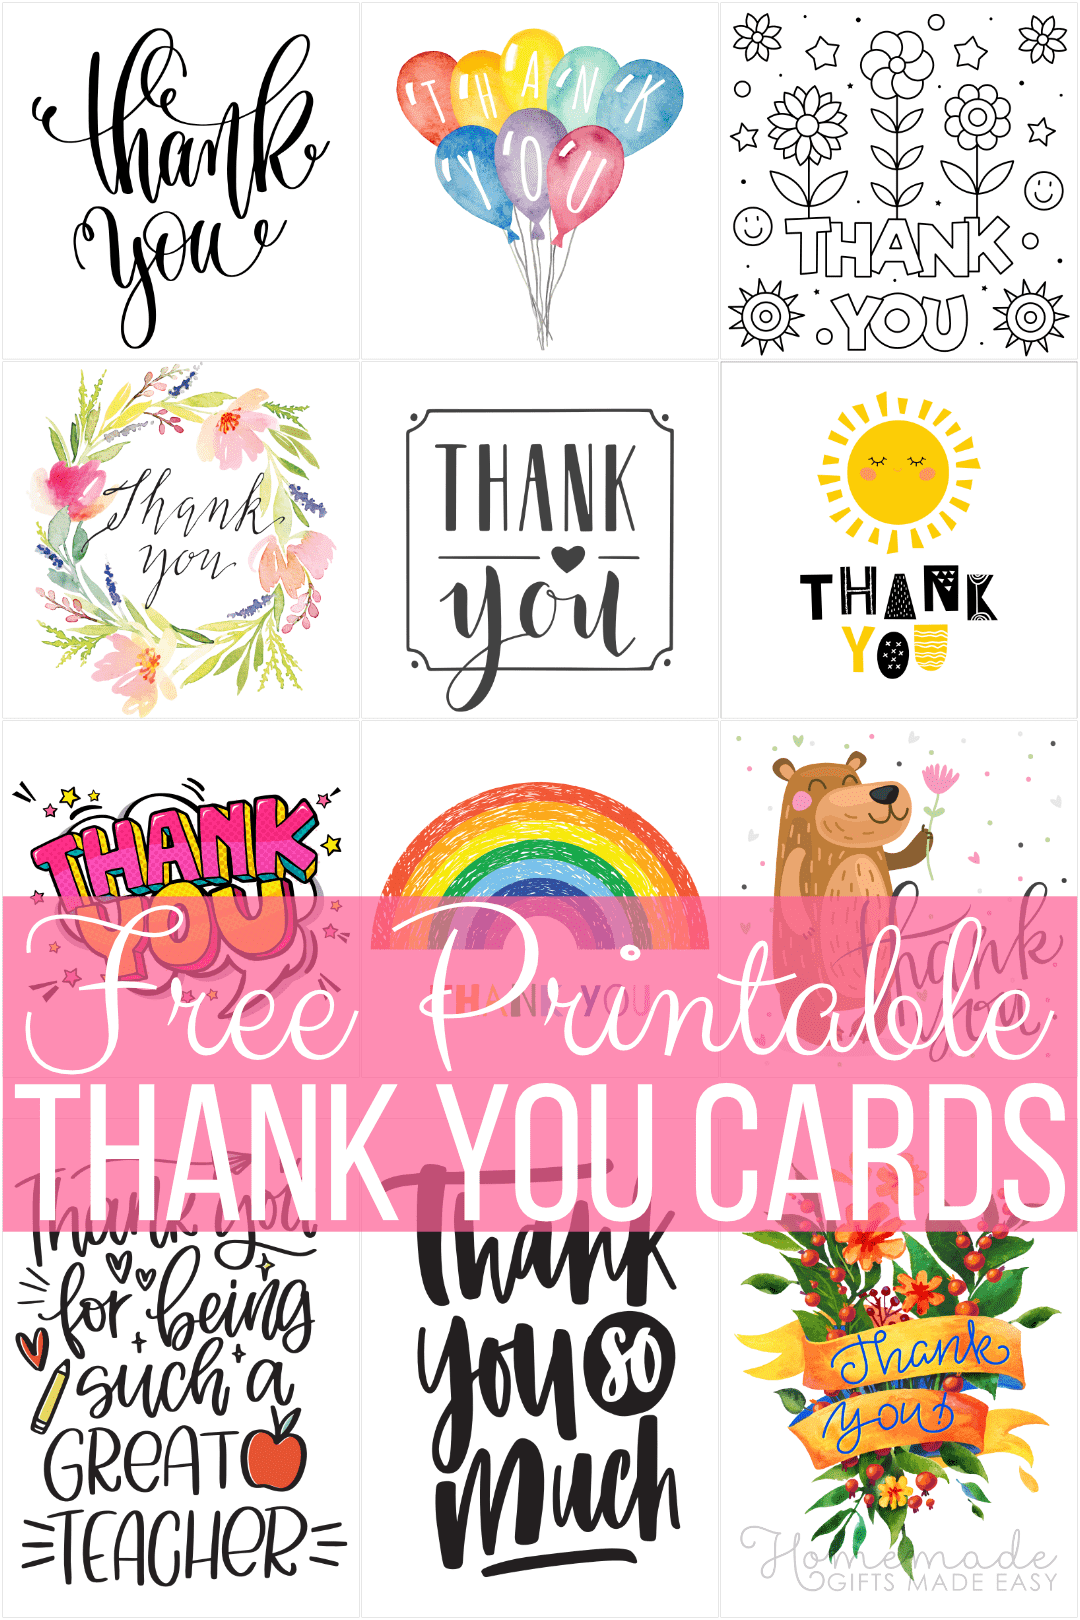 Free Printable Thank You Cards - 48 designs